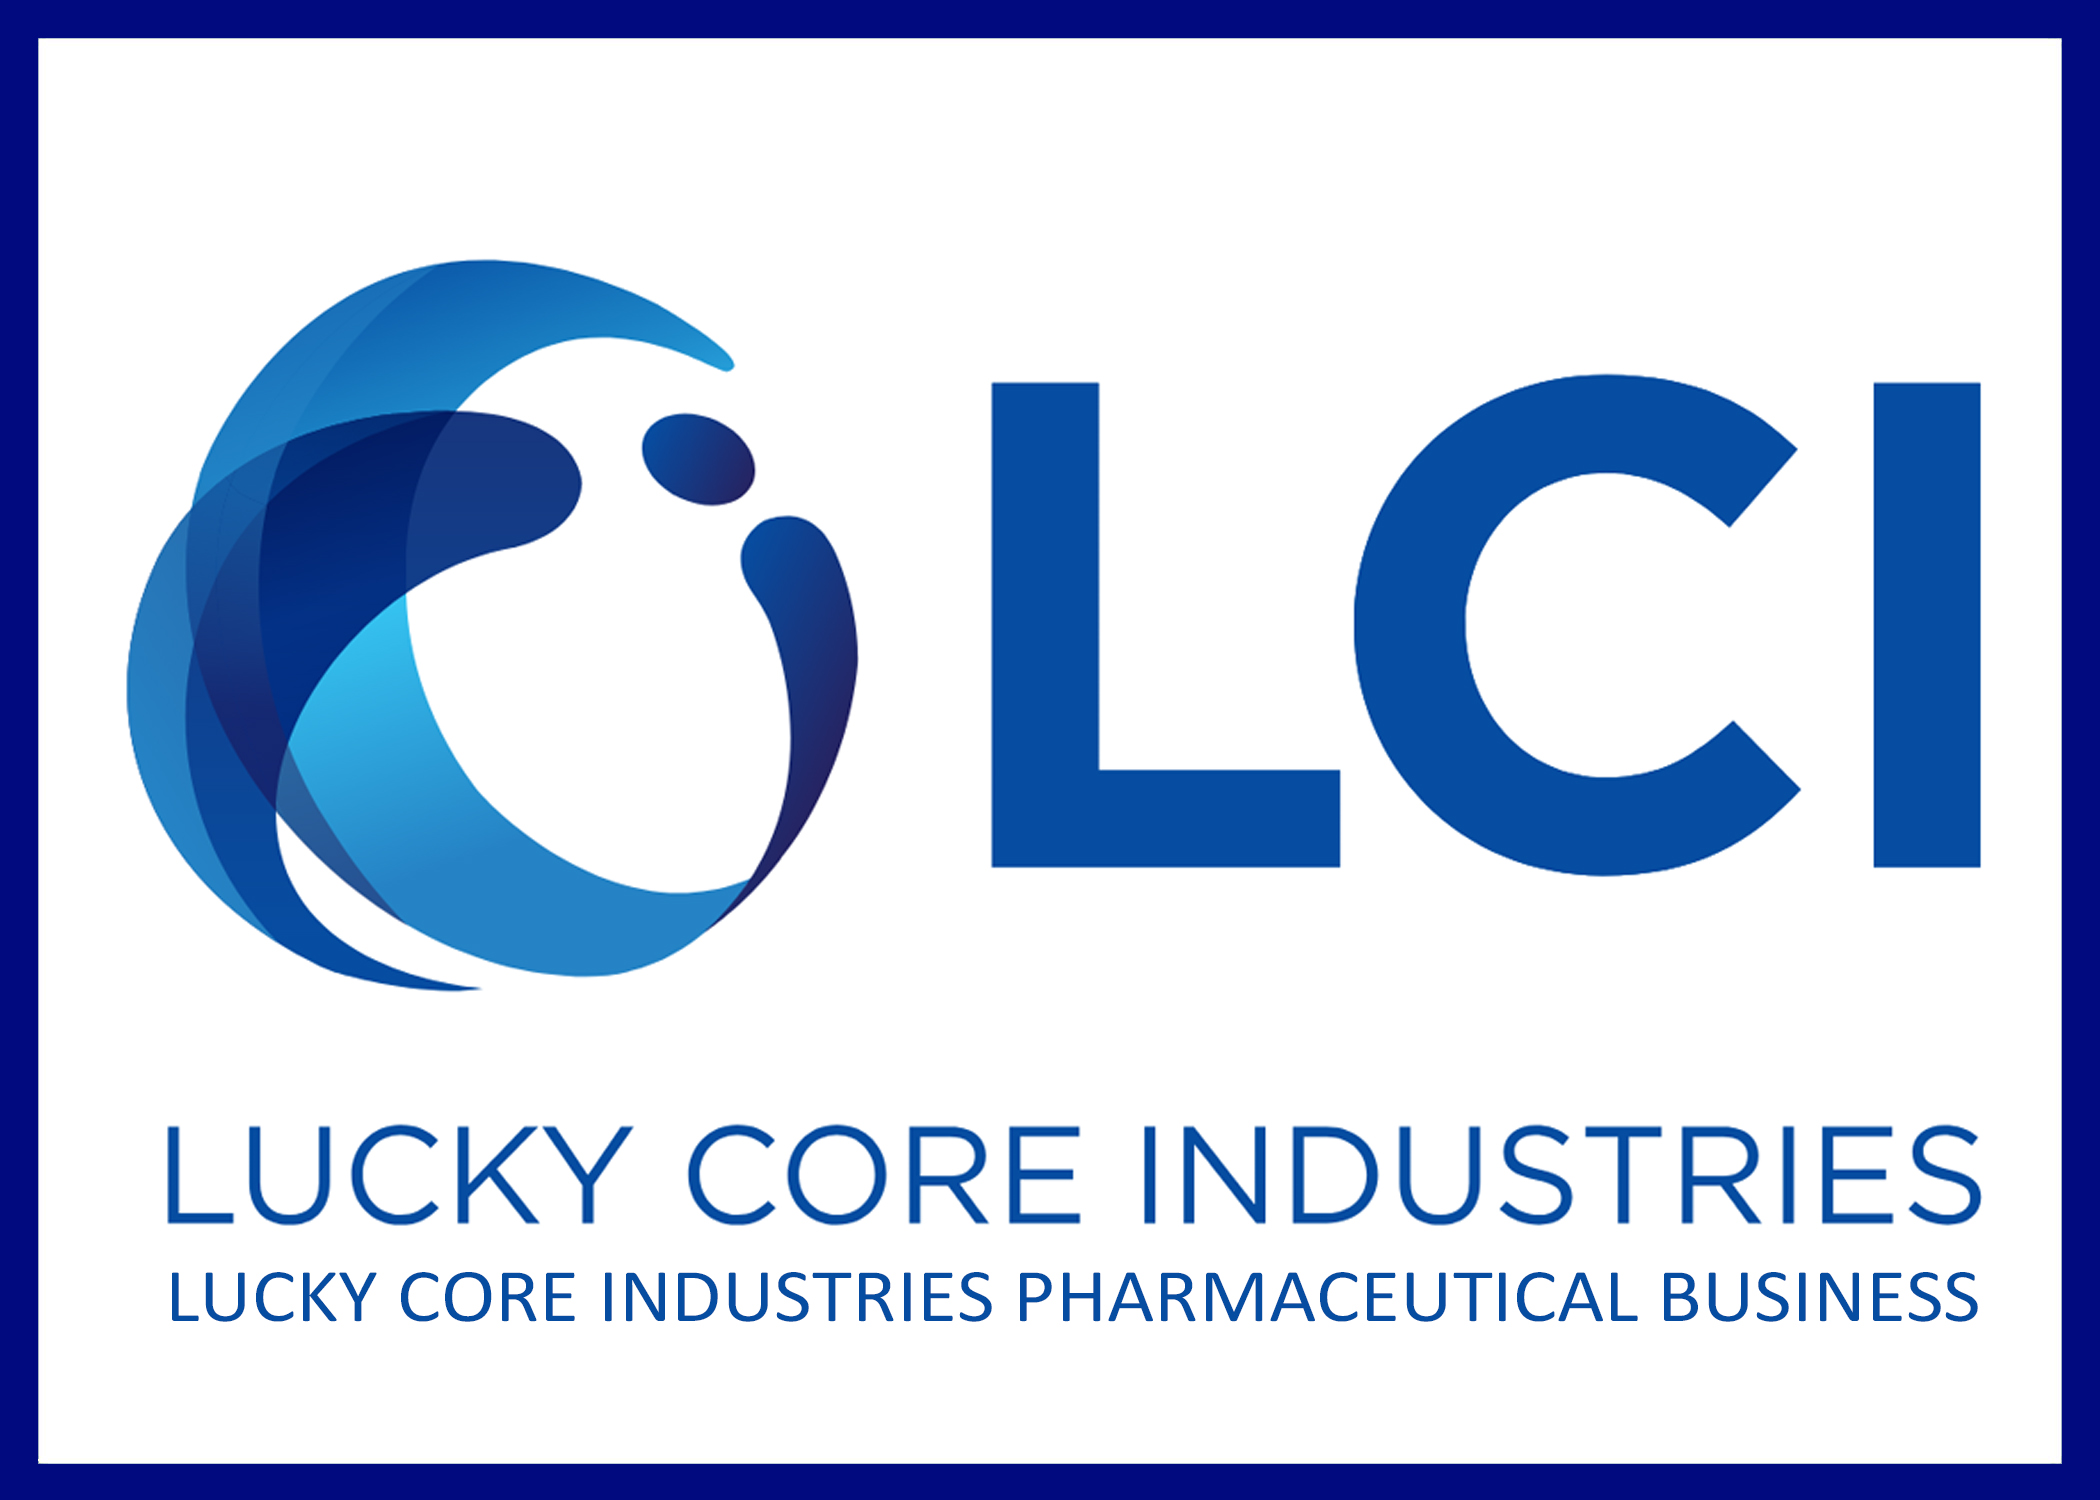 LUCKY CORE INDUSTRIES PHARMACEUTICAL BUSINESS